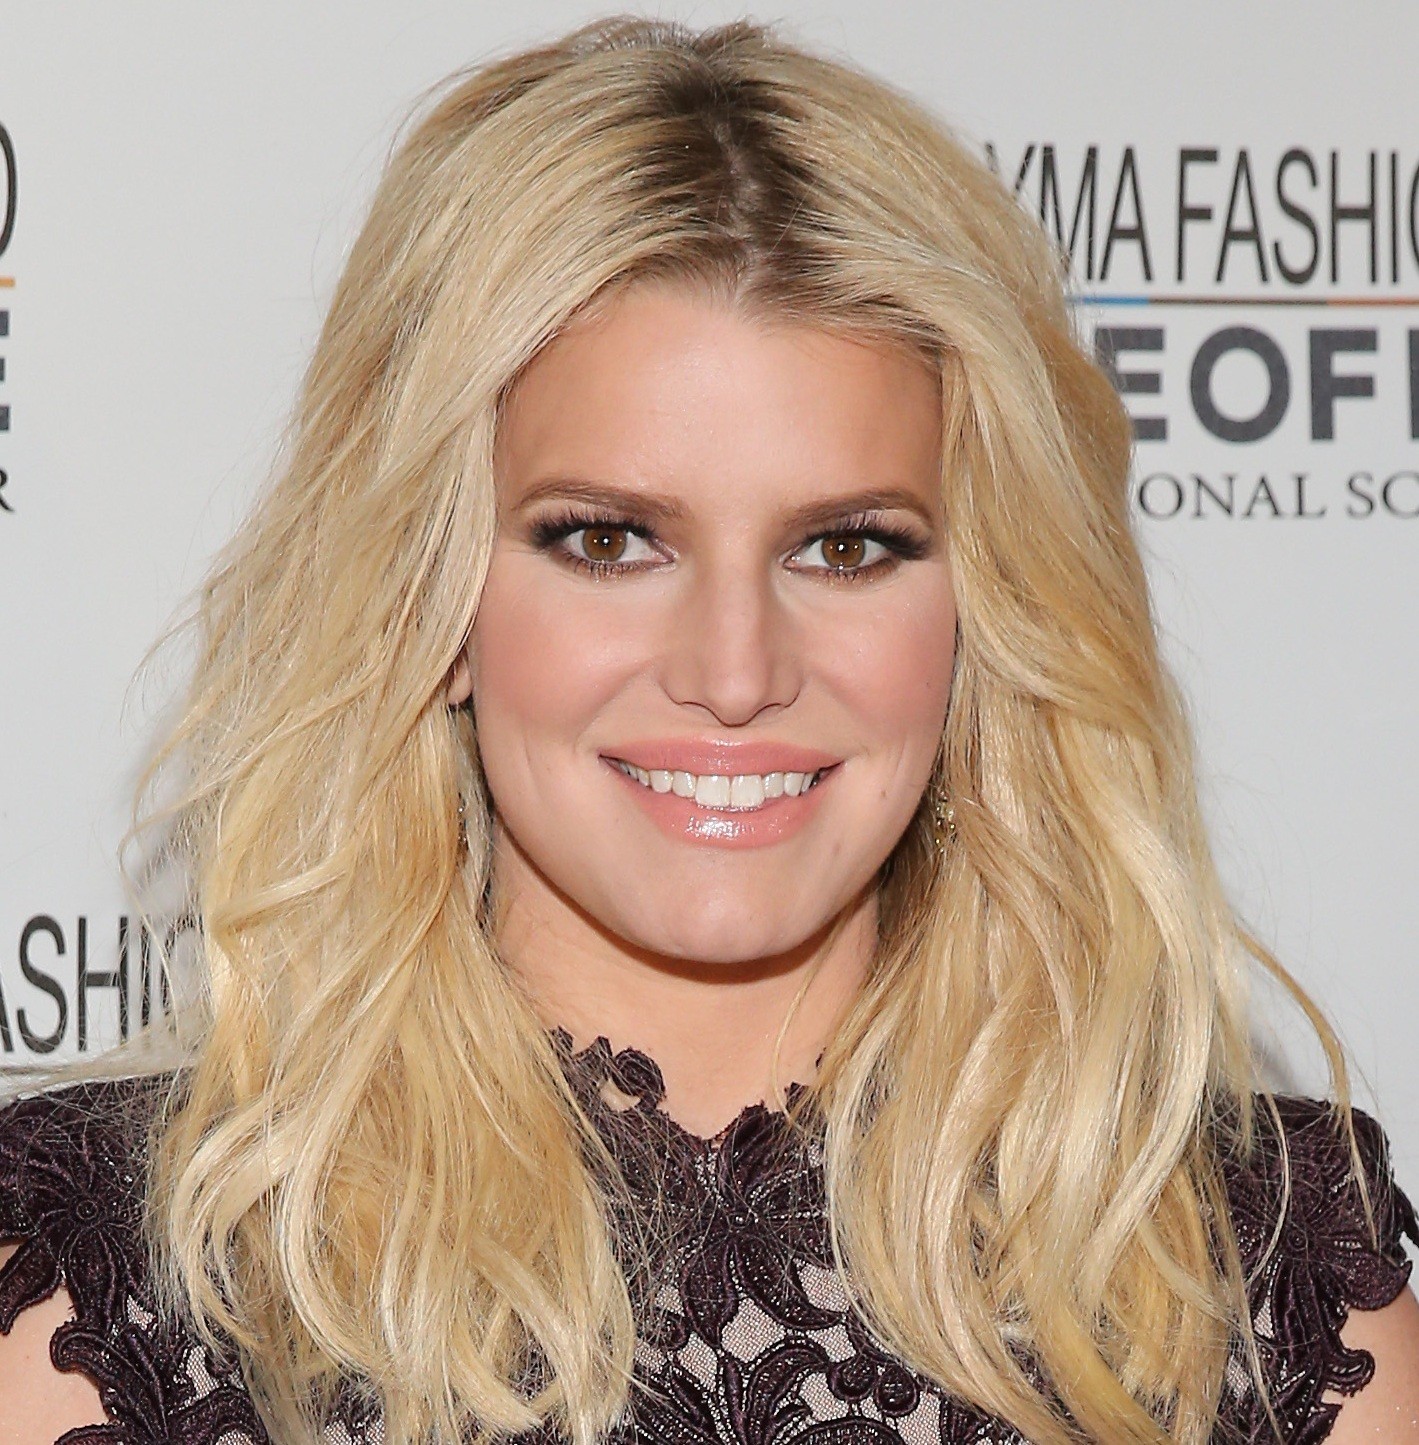 Jessica Simpson's Lips: Fans Say She's 'Hard to Recognize